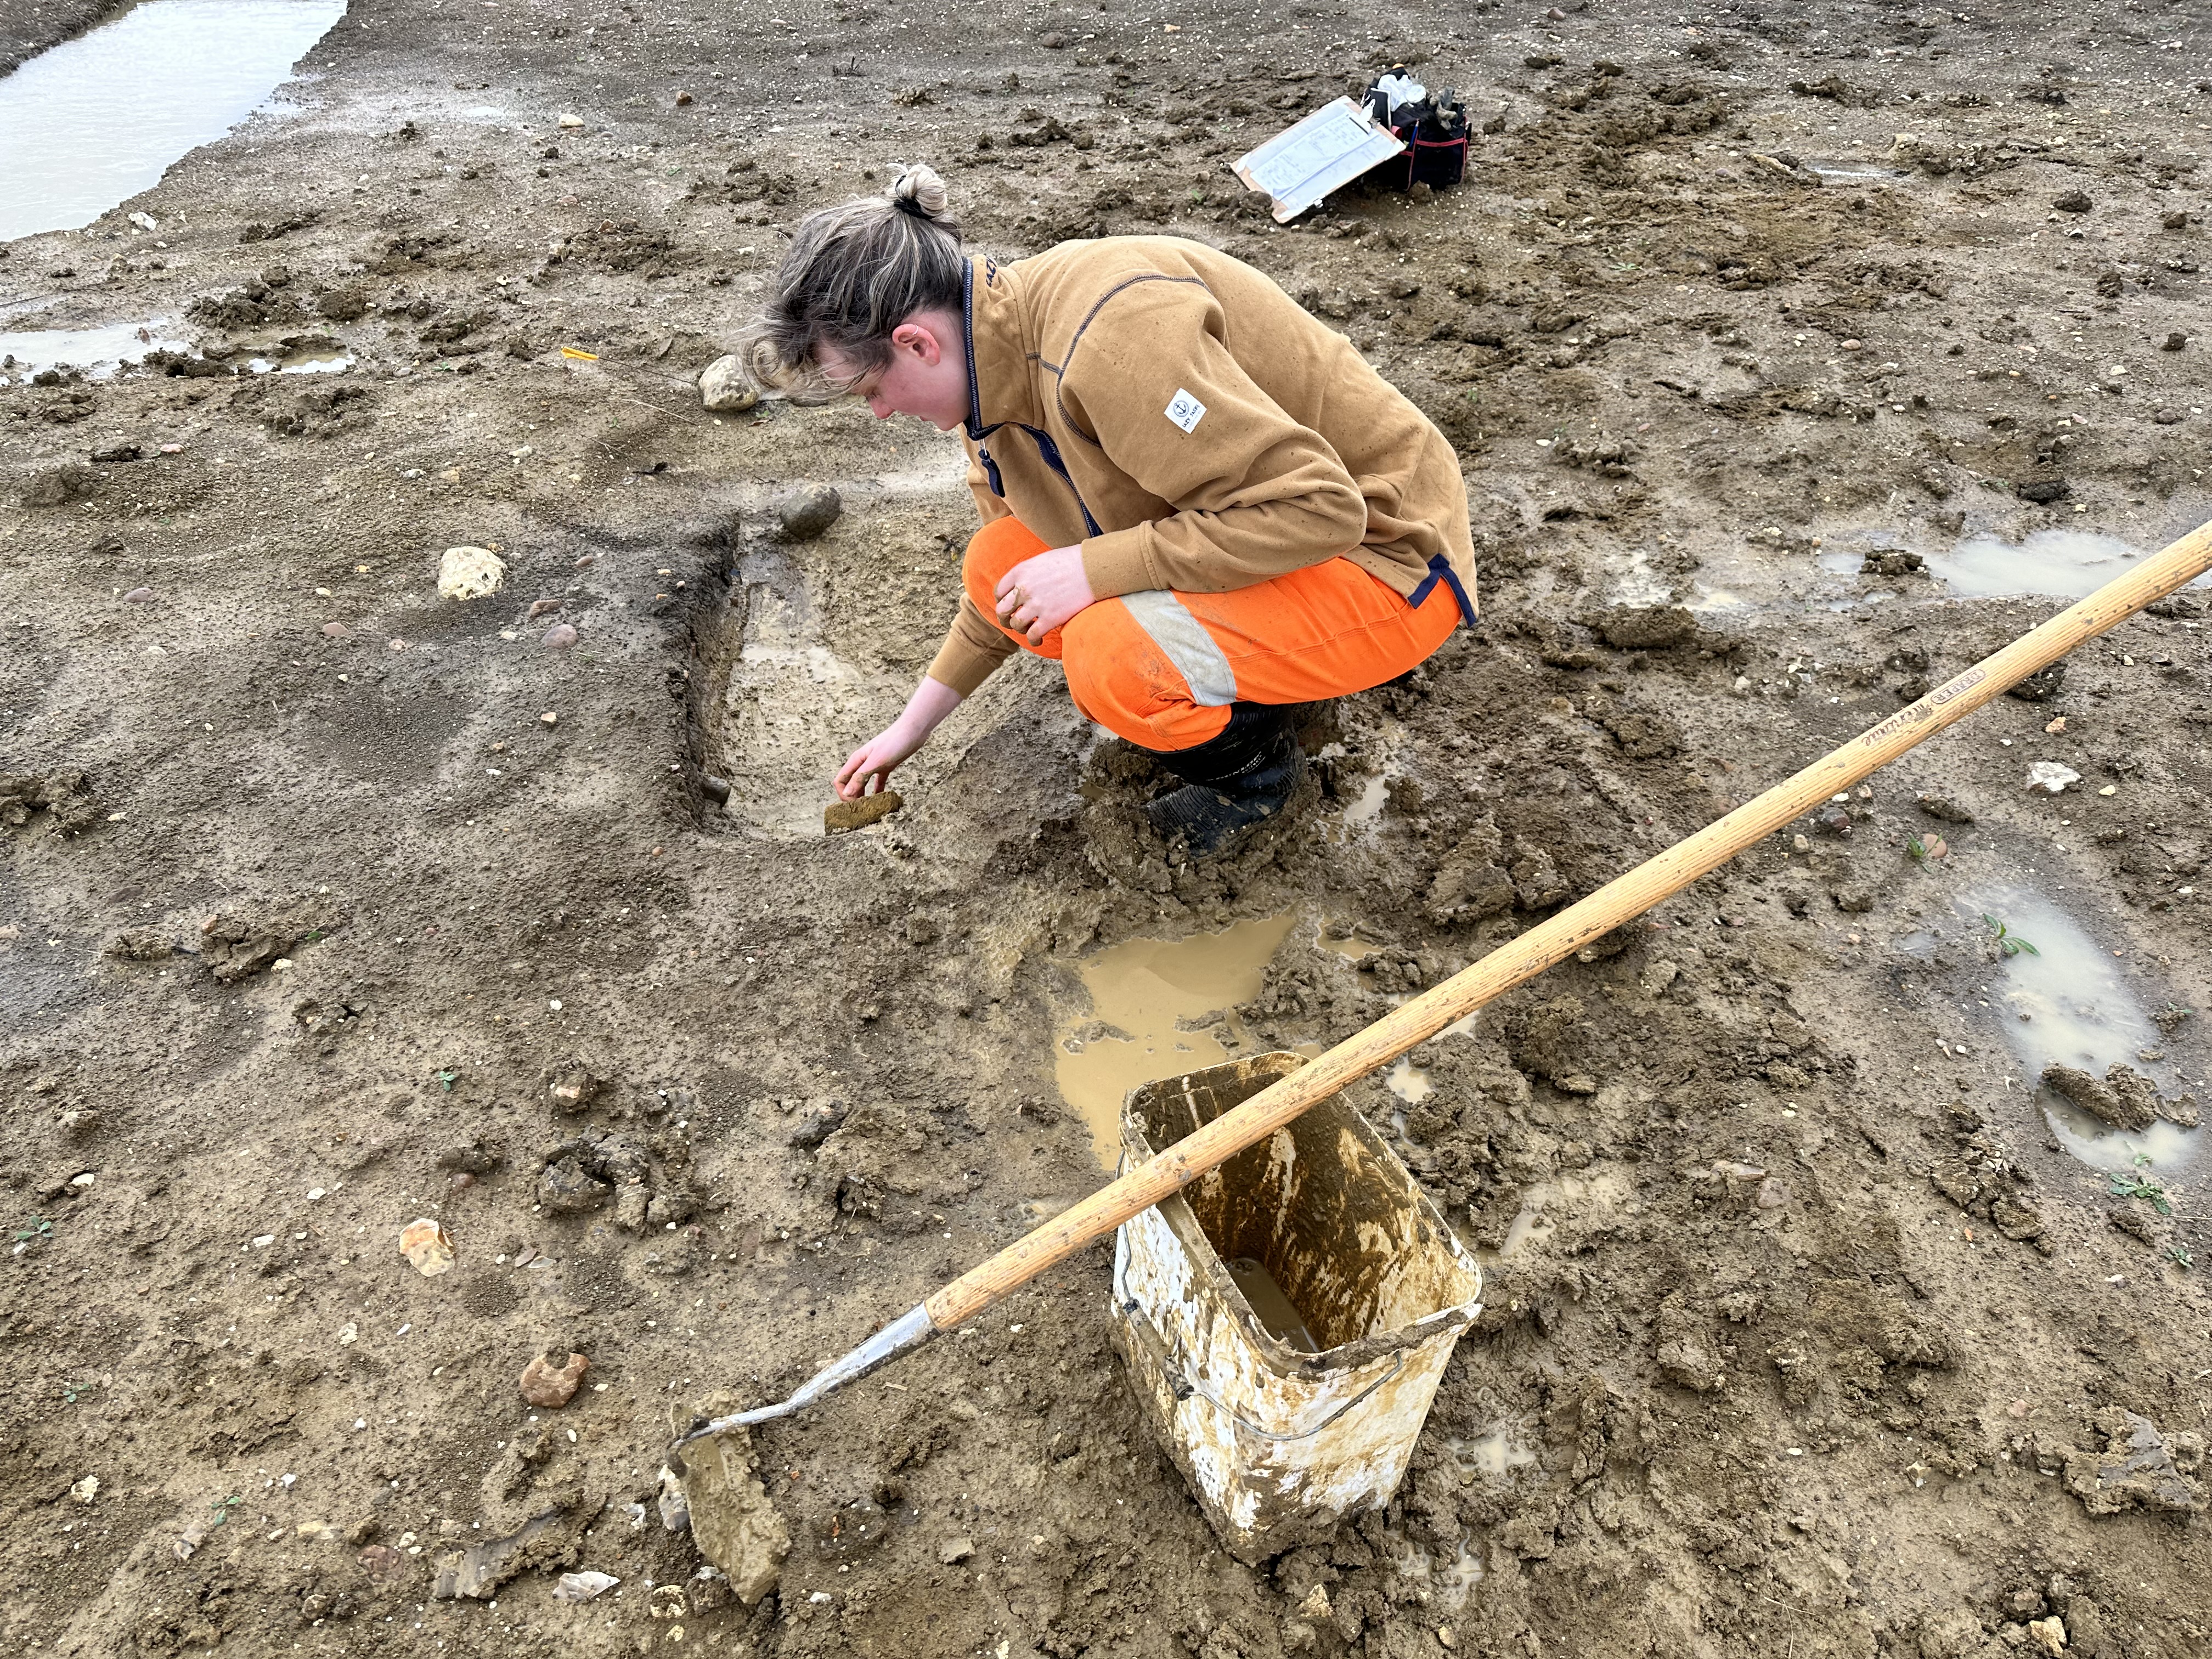 Graduate trainee archaeologist Ashley wearing high visibility orange trousers, surrounded by mud and puddles, uses a sponge to clear water from the bottom of her feature to get it ready for recording.